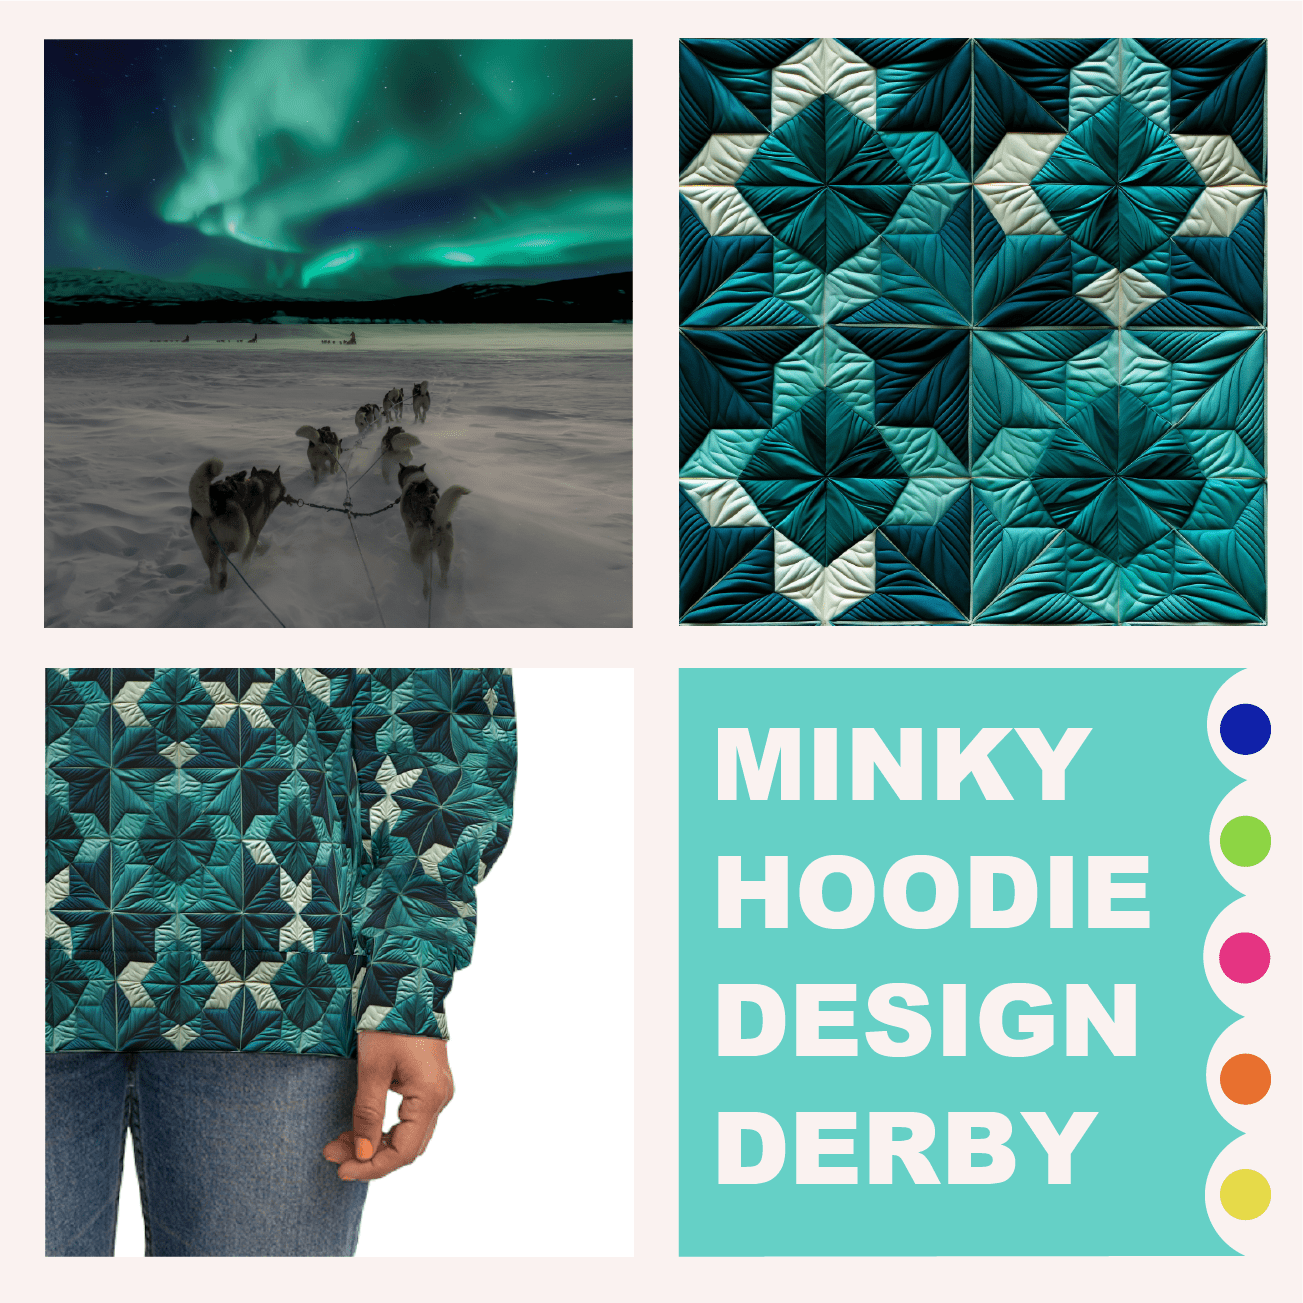 Minky Hoodies Are Back! Welcome to the Minky Design Derby…